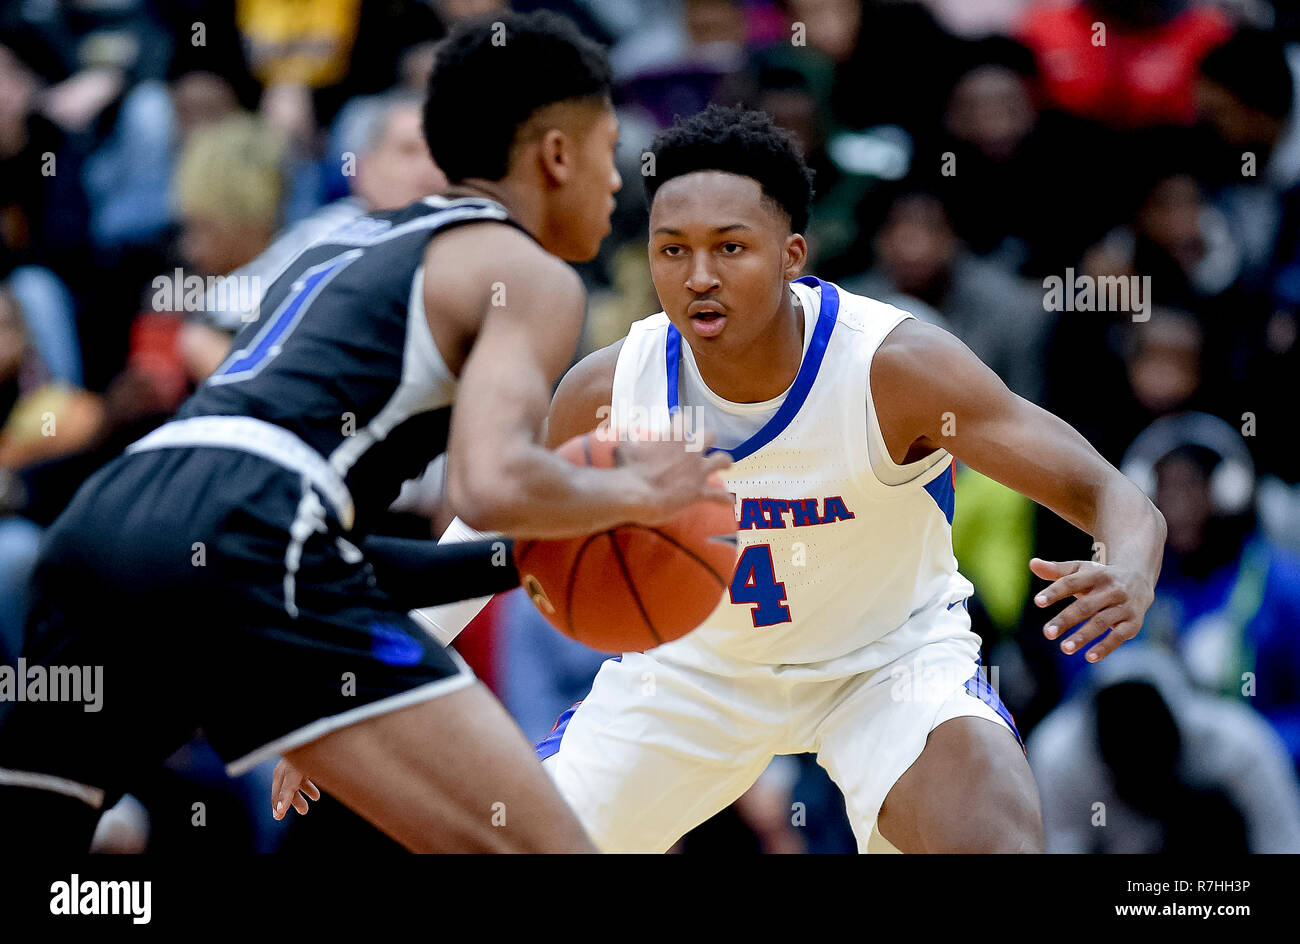 Hyattsville, Maryland, USA. 8th Dec, 2018. December 9, 2018: DeMatha senior Jamir Young guards IMG Academy junior Noah Farrakhan during the ARS Rescue Rooter National Hoopfest at DeMatha High School in Hyattsville, Maryland on December 9, 2018. In action between nationally ranked heavyweights. #1 Montverde defeated #11 St. Paul VI 57-50 and #2 IMG Academy defeated #6 DeMatha 73-67 Scott Serio/Eclipse Sportswire/CSM/Alamy Live News Stock Photo